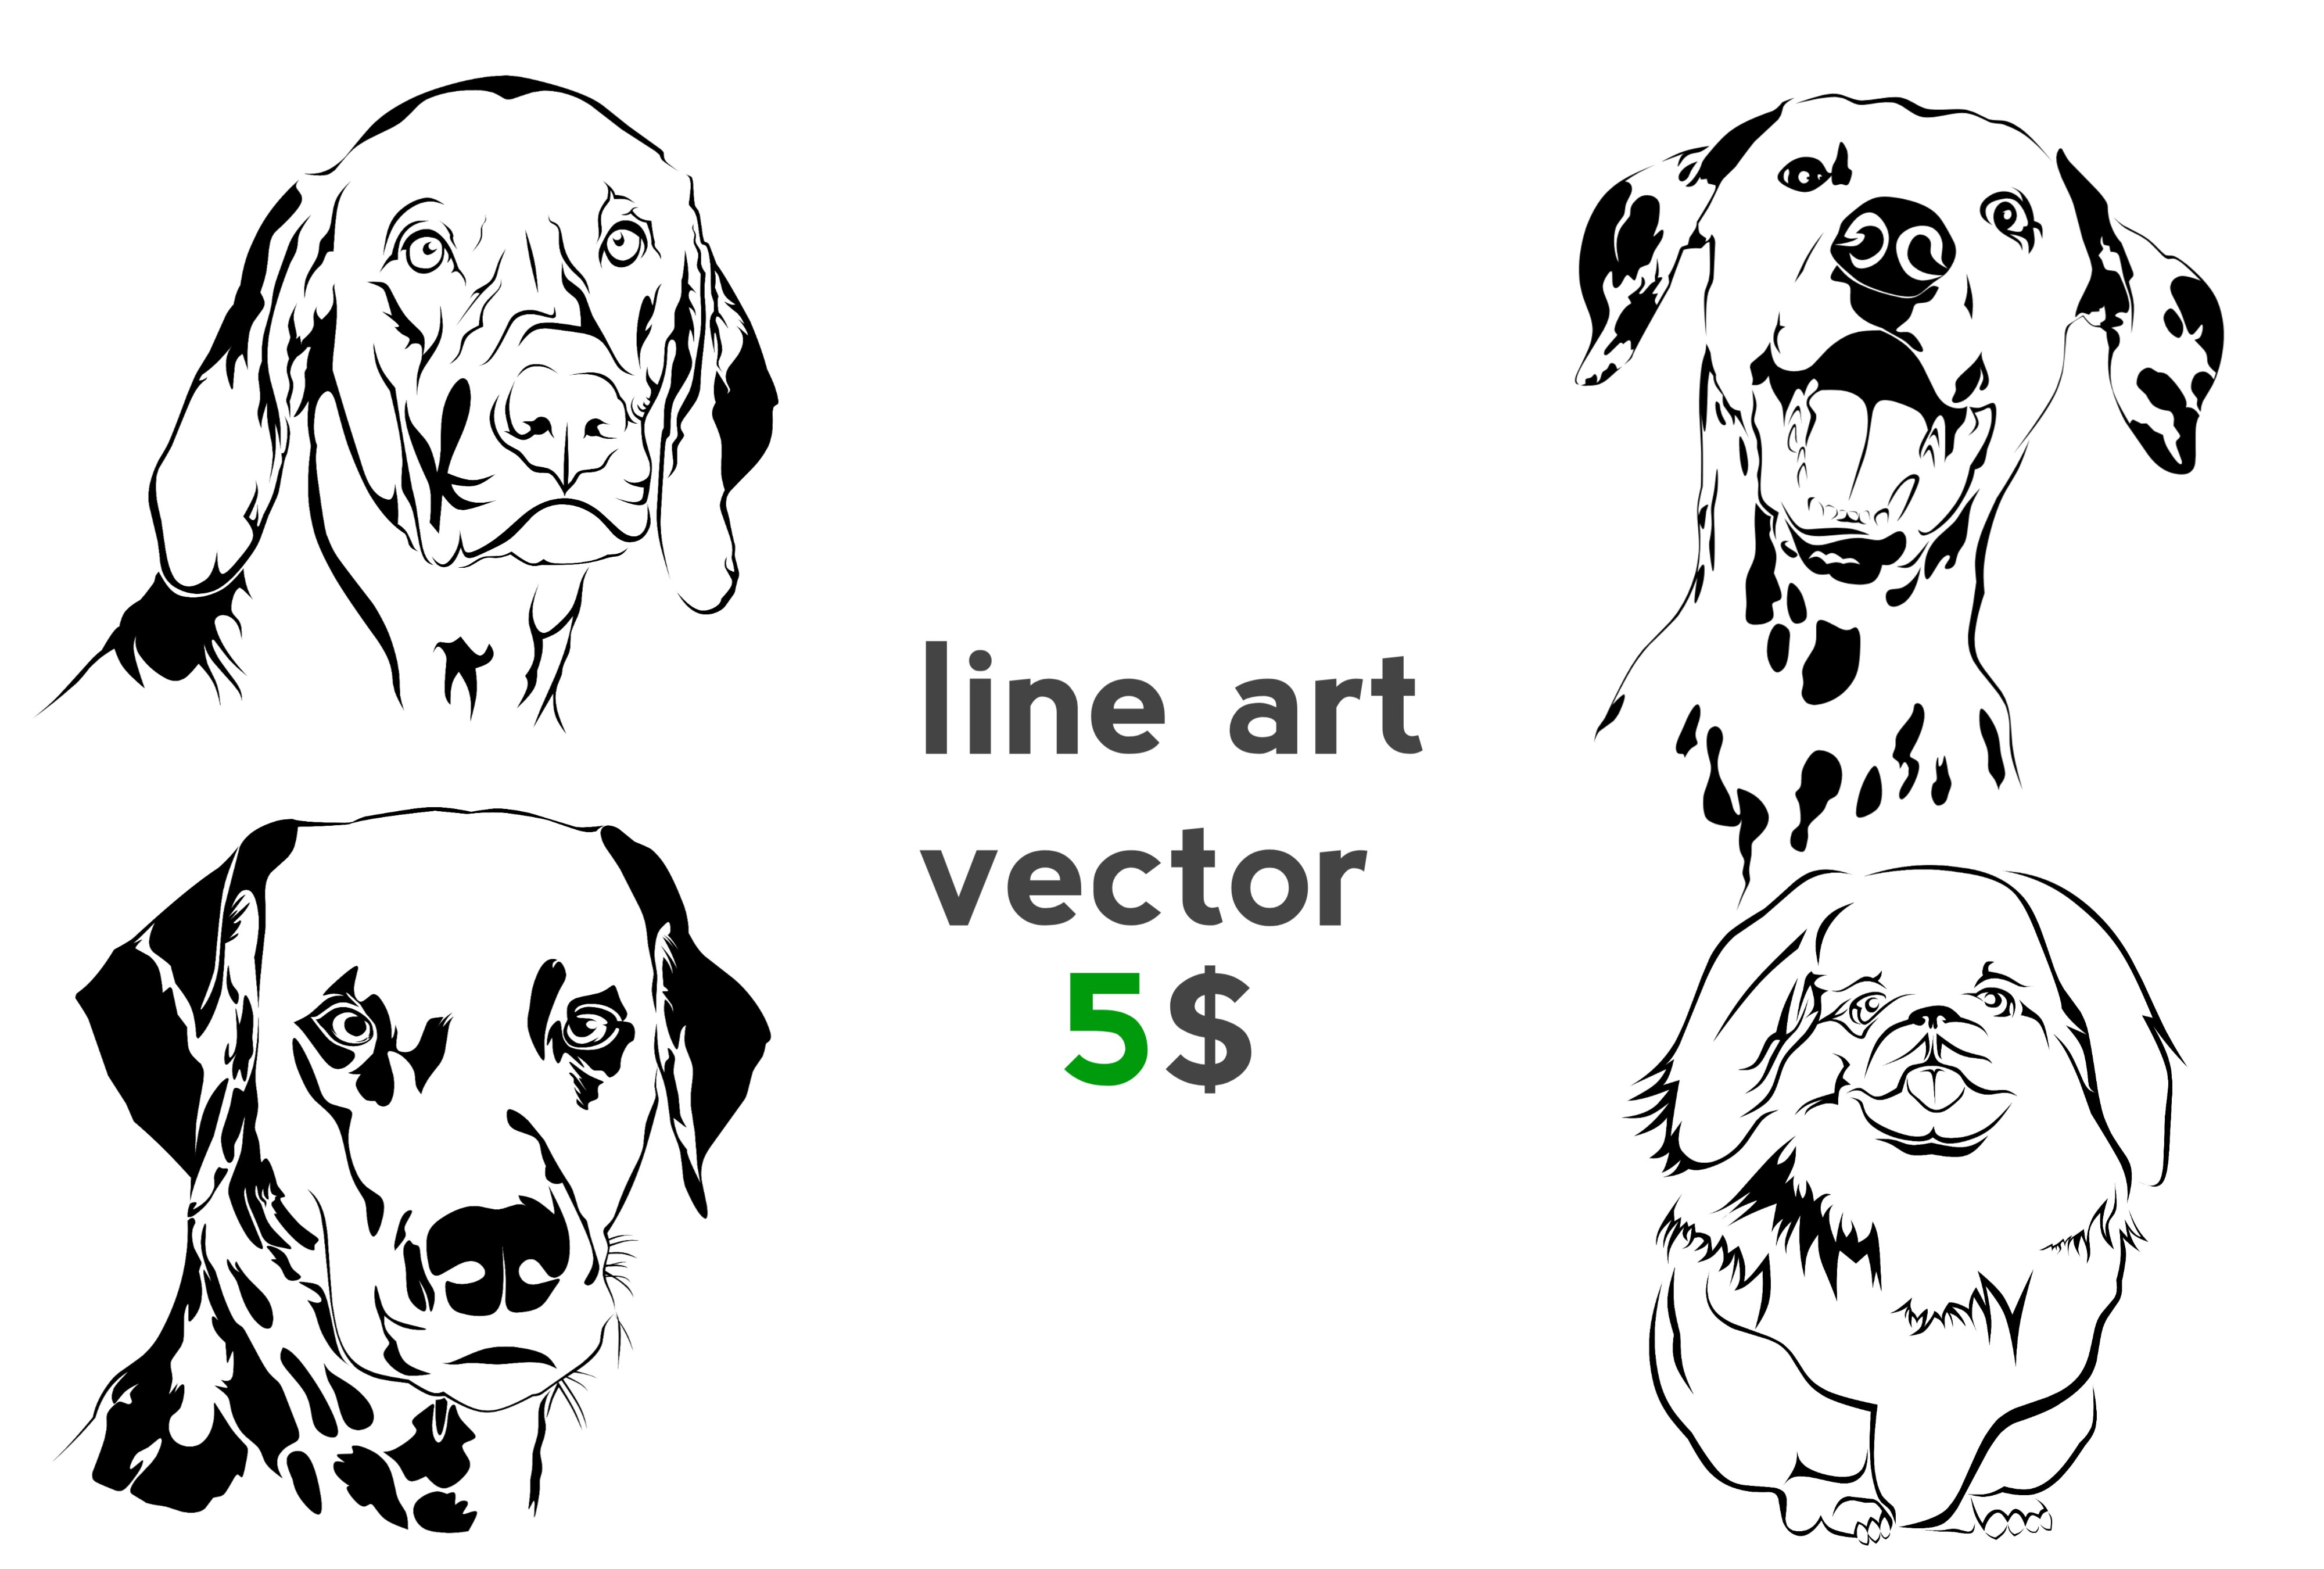 Draw line art from your pet, dog, cat and other animals by Zackberty |  Fiverr